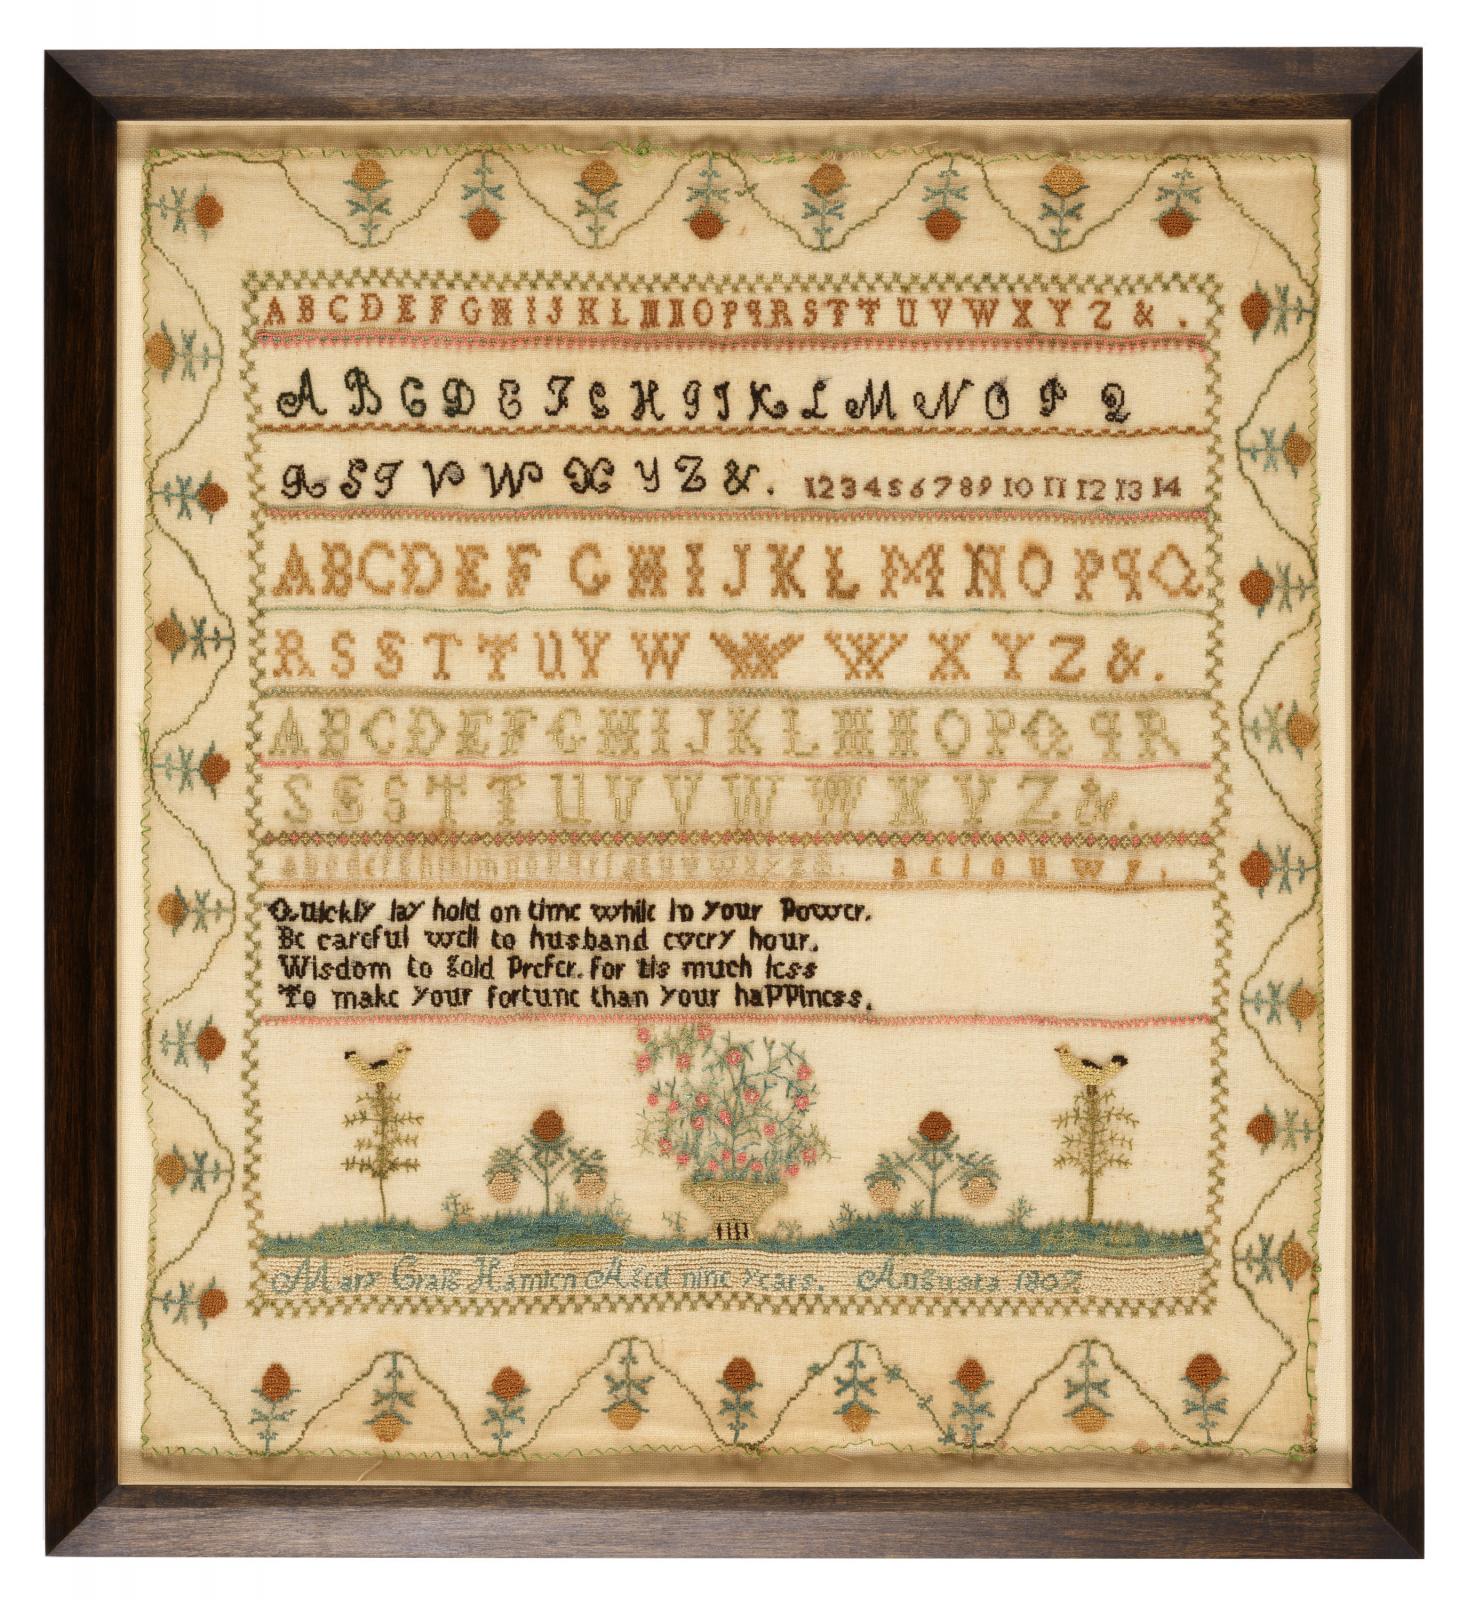 Design embroidered on cloth, with the alphabet repeated in four different fonts and a verse underneath, completed at the bottom with the maker's name, age, and location.  